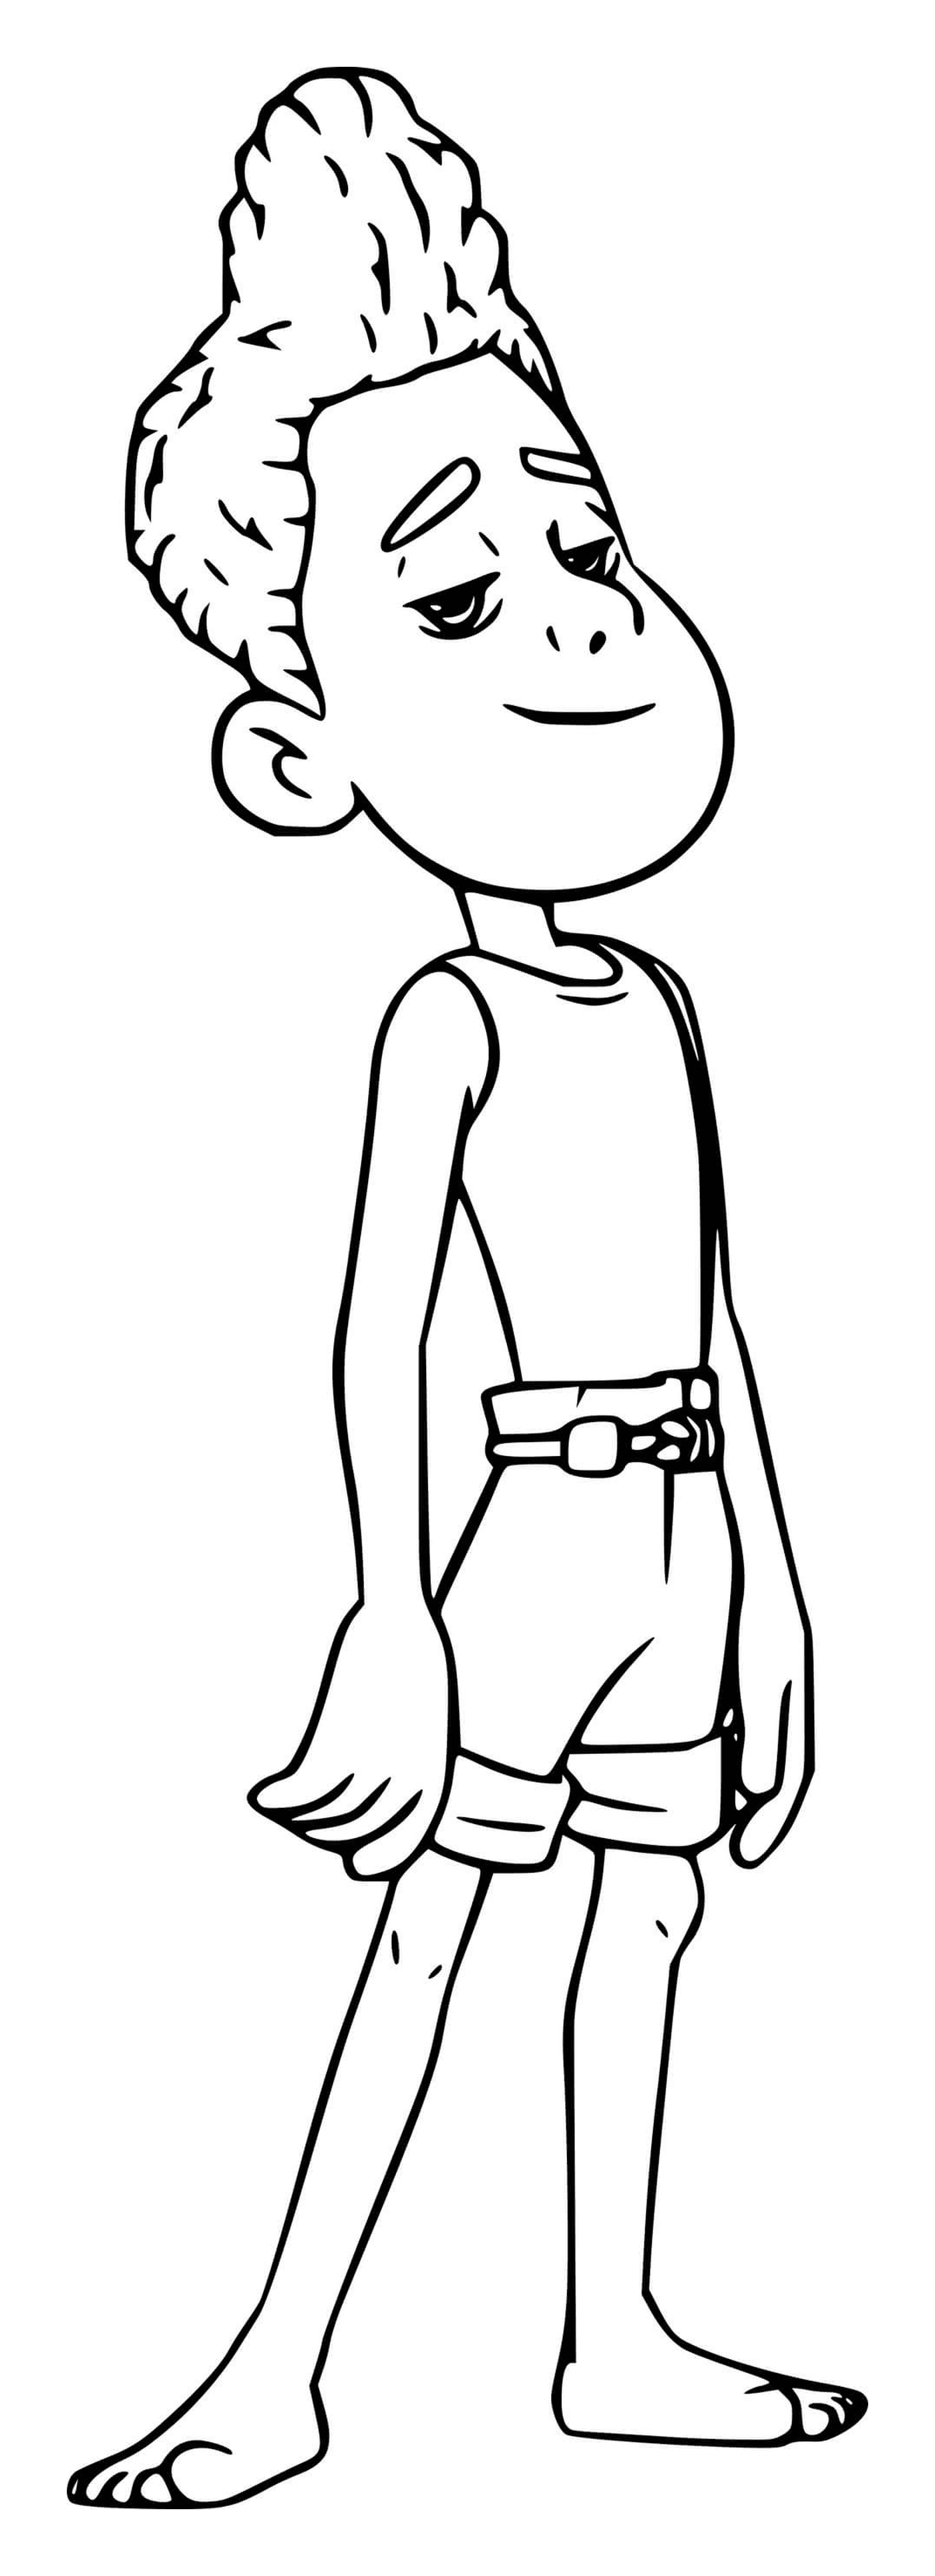  Person standing in a linear drawing 